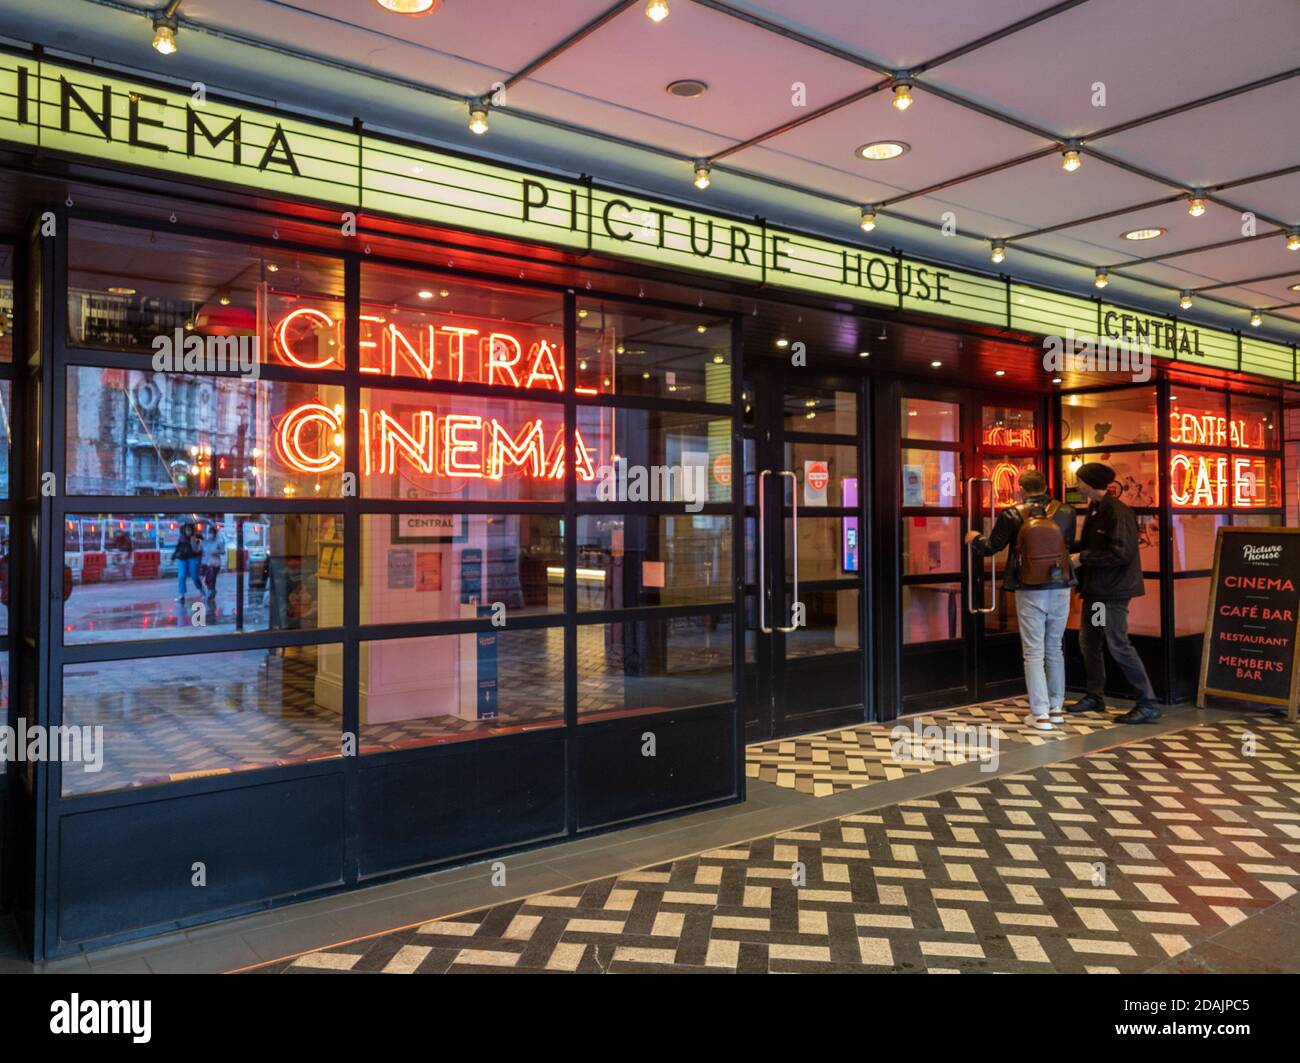 Central Cinema and coffee bar in London Soho. Stock Photo